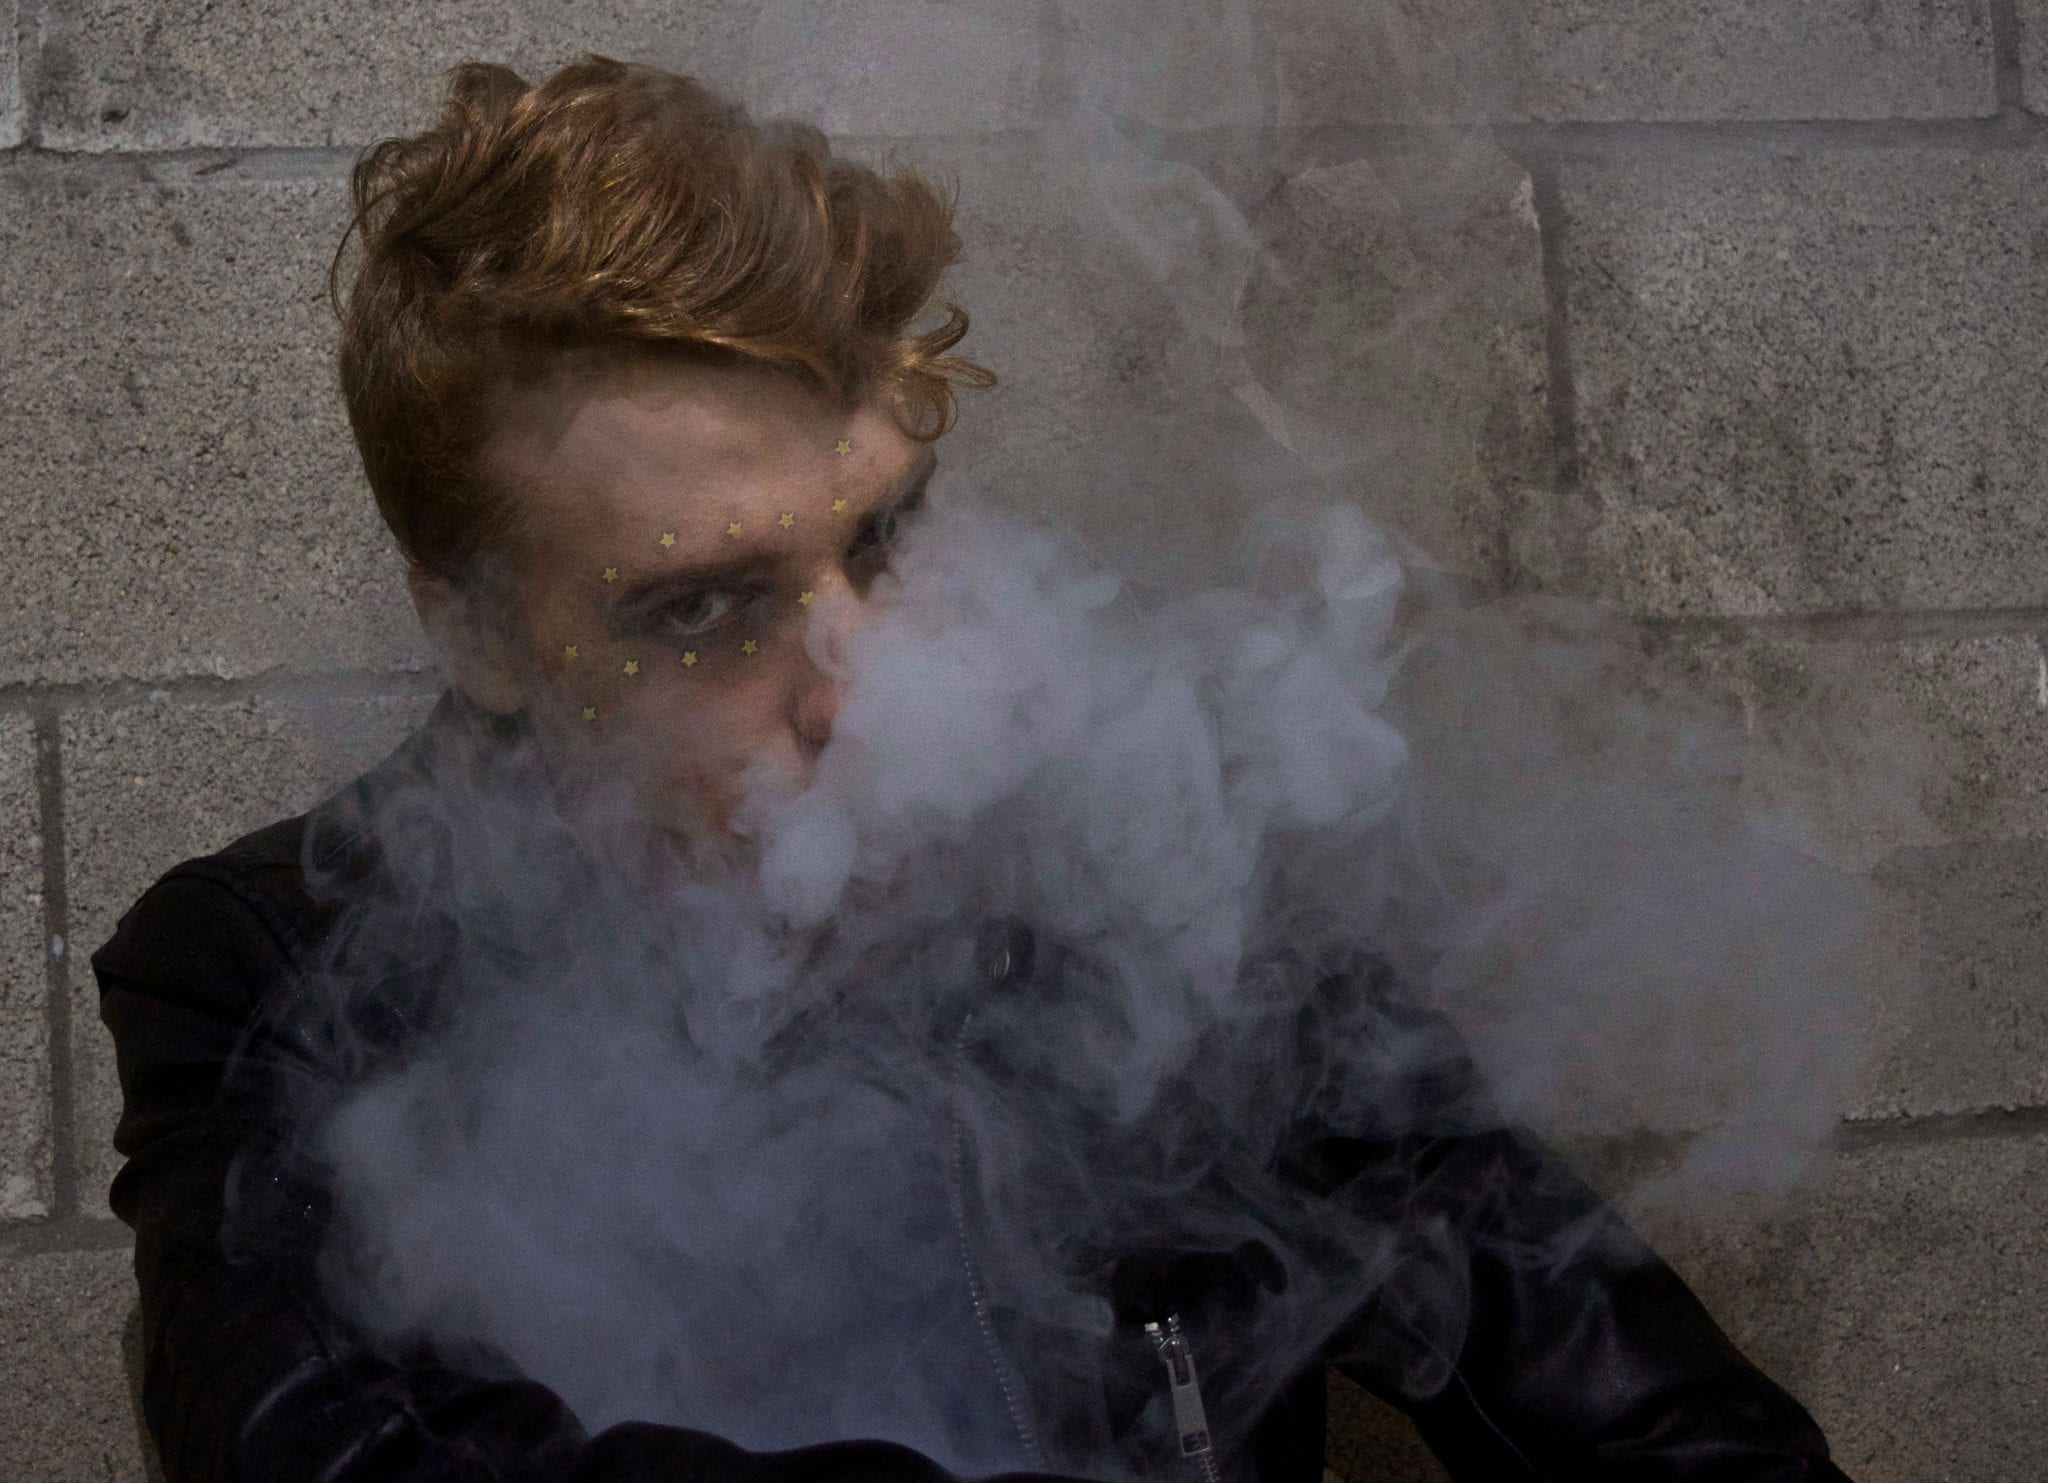 E-Cig Flavors Found to be Toxic When Inhaled